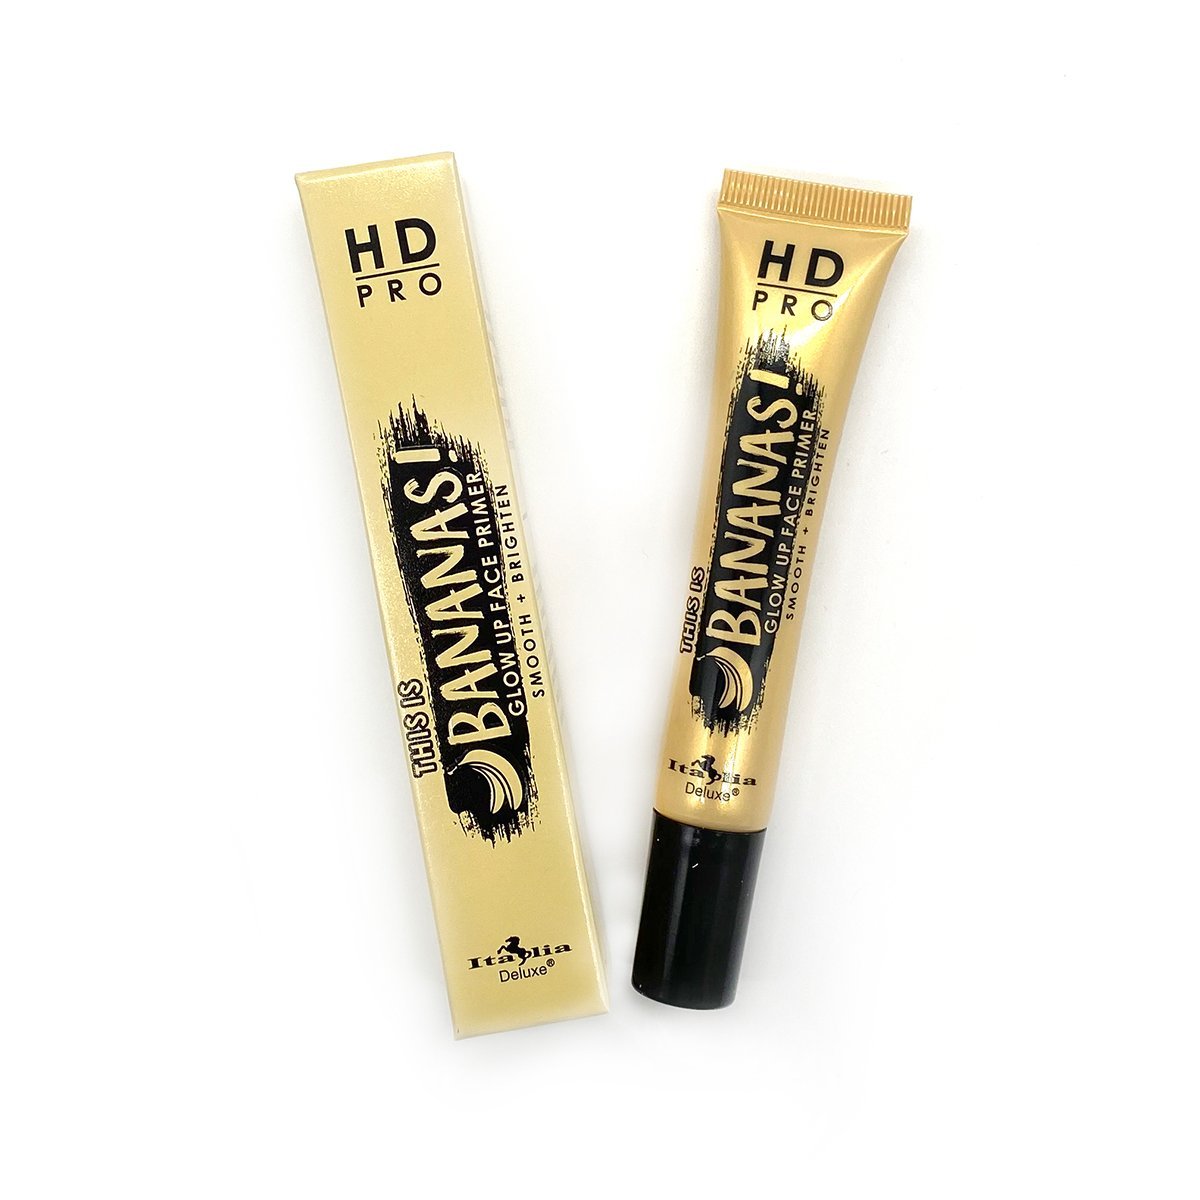 Italia Deluxe This Is Bananas! HD Pro Glow Up Face Primer